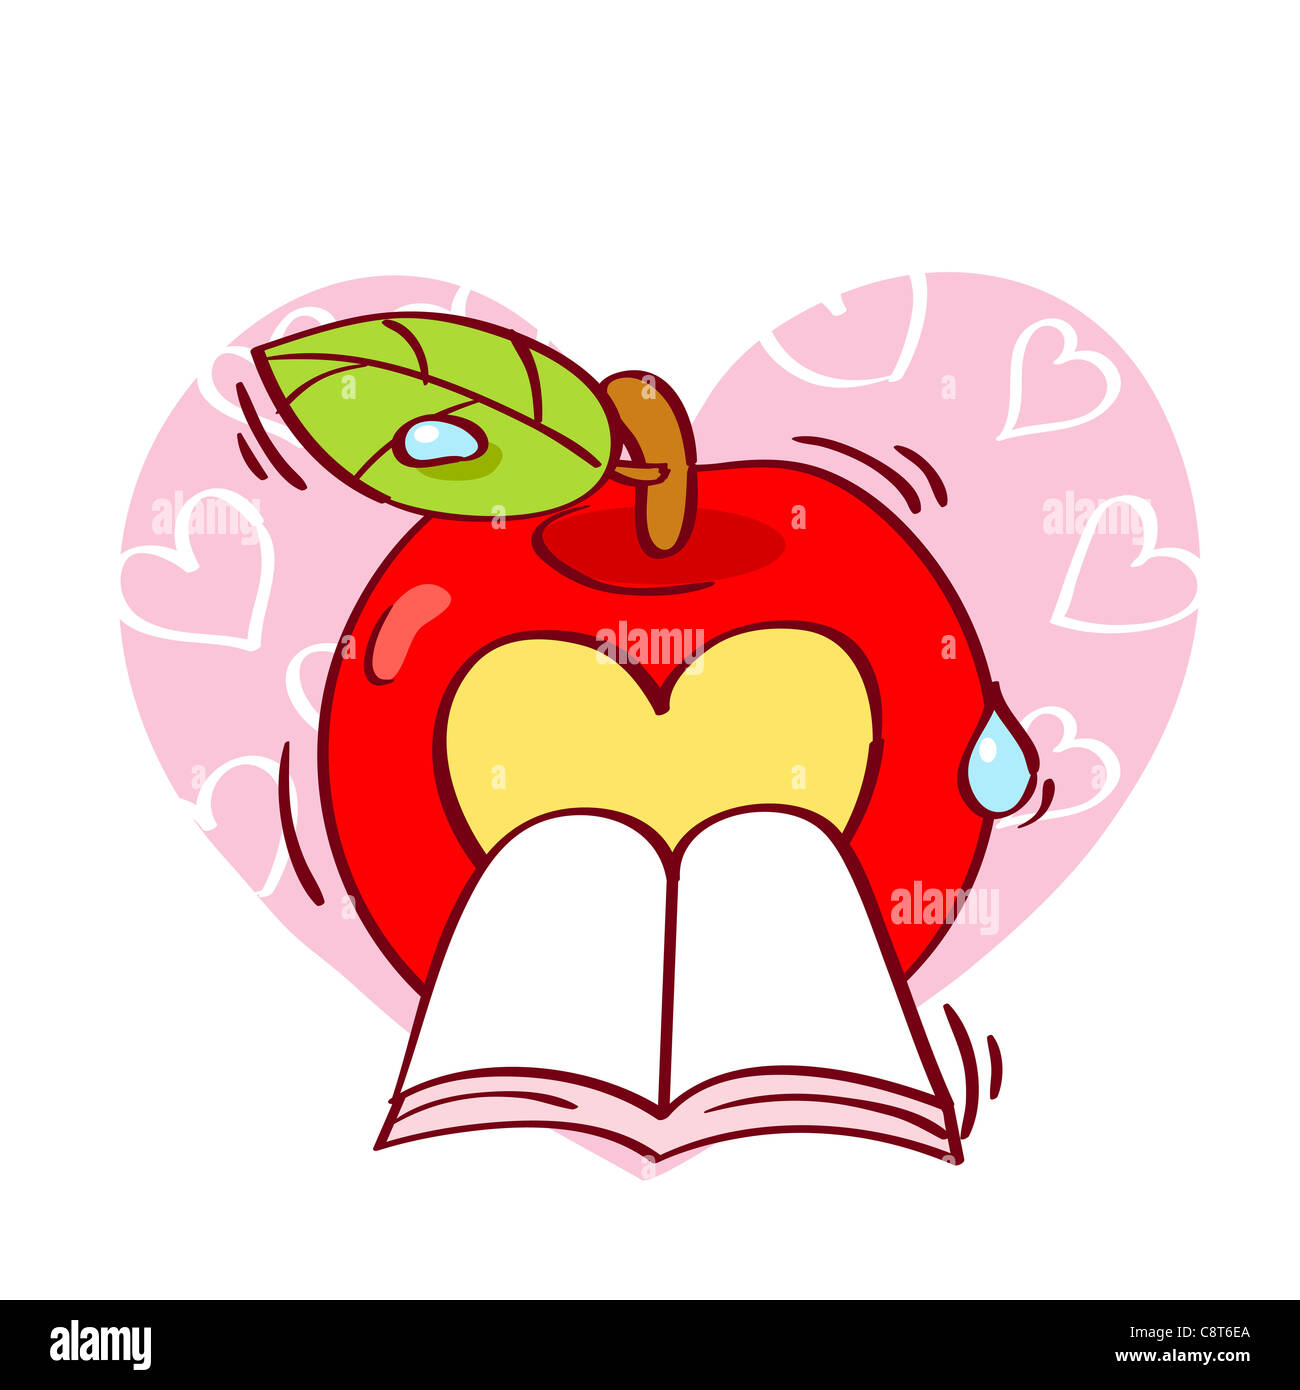 Illustration of book and apple Stock Photo